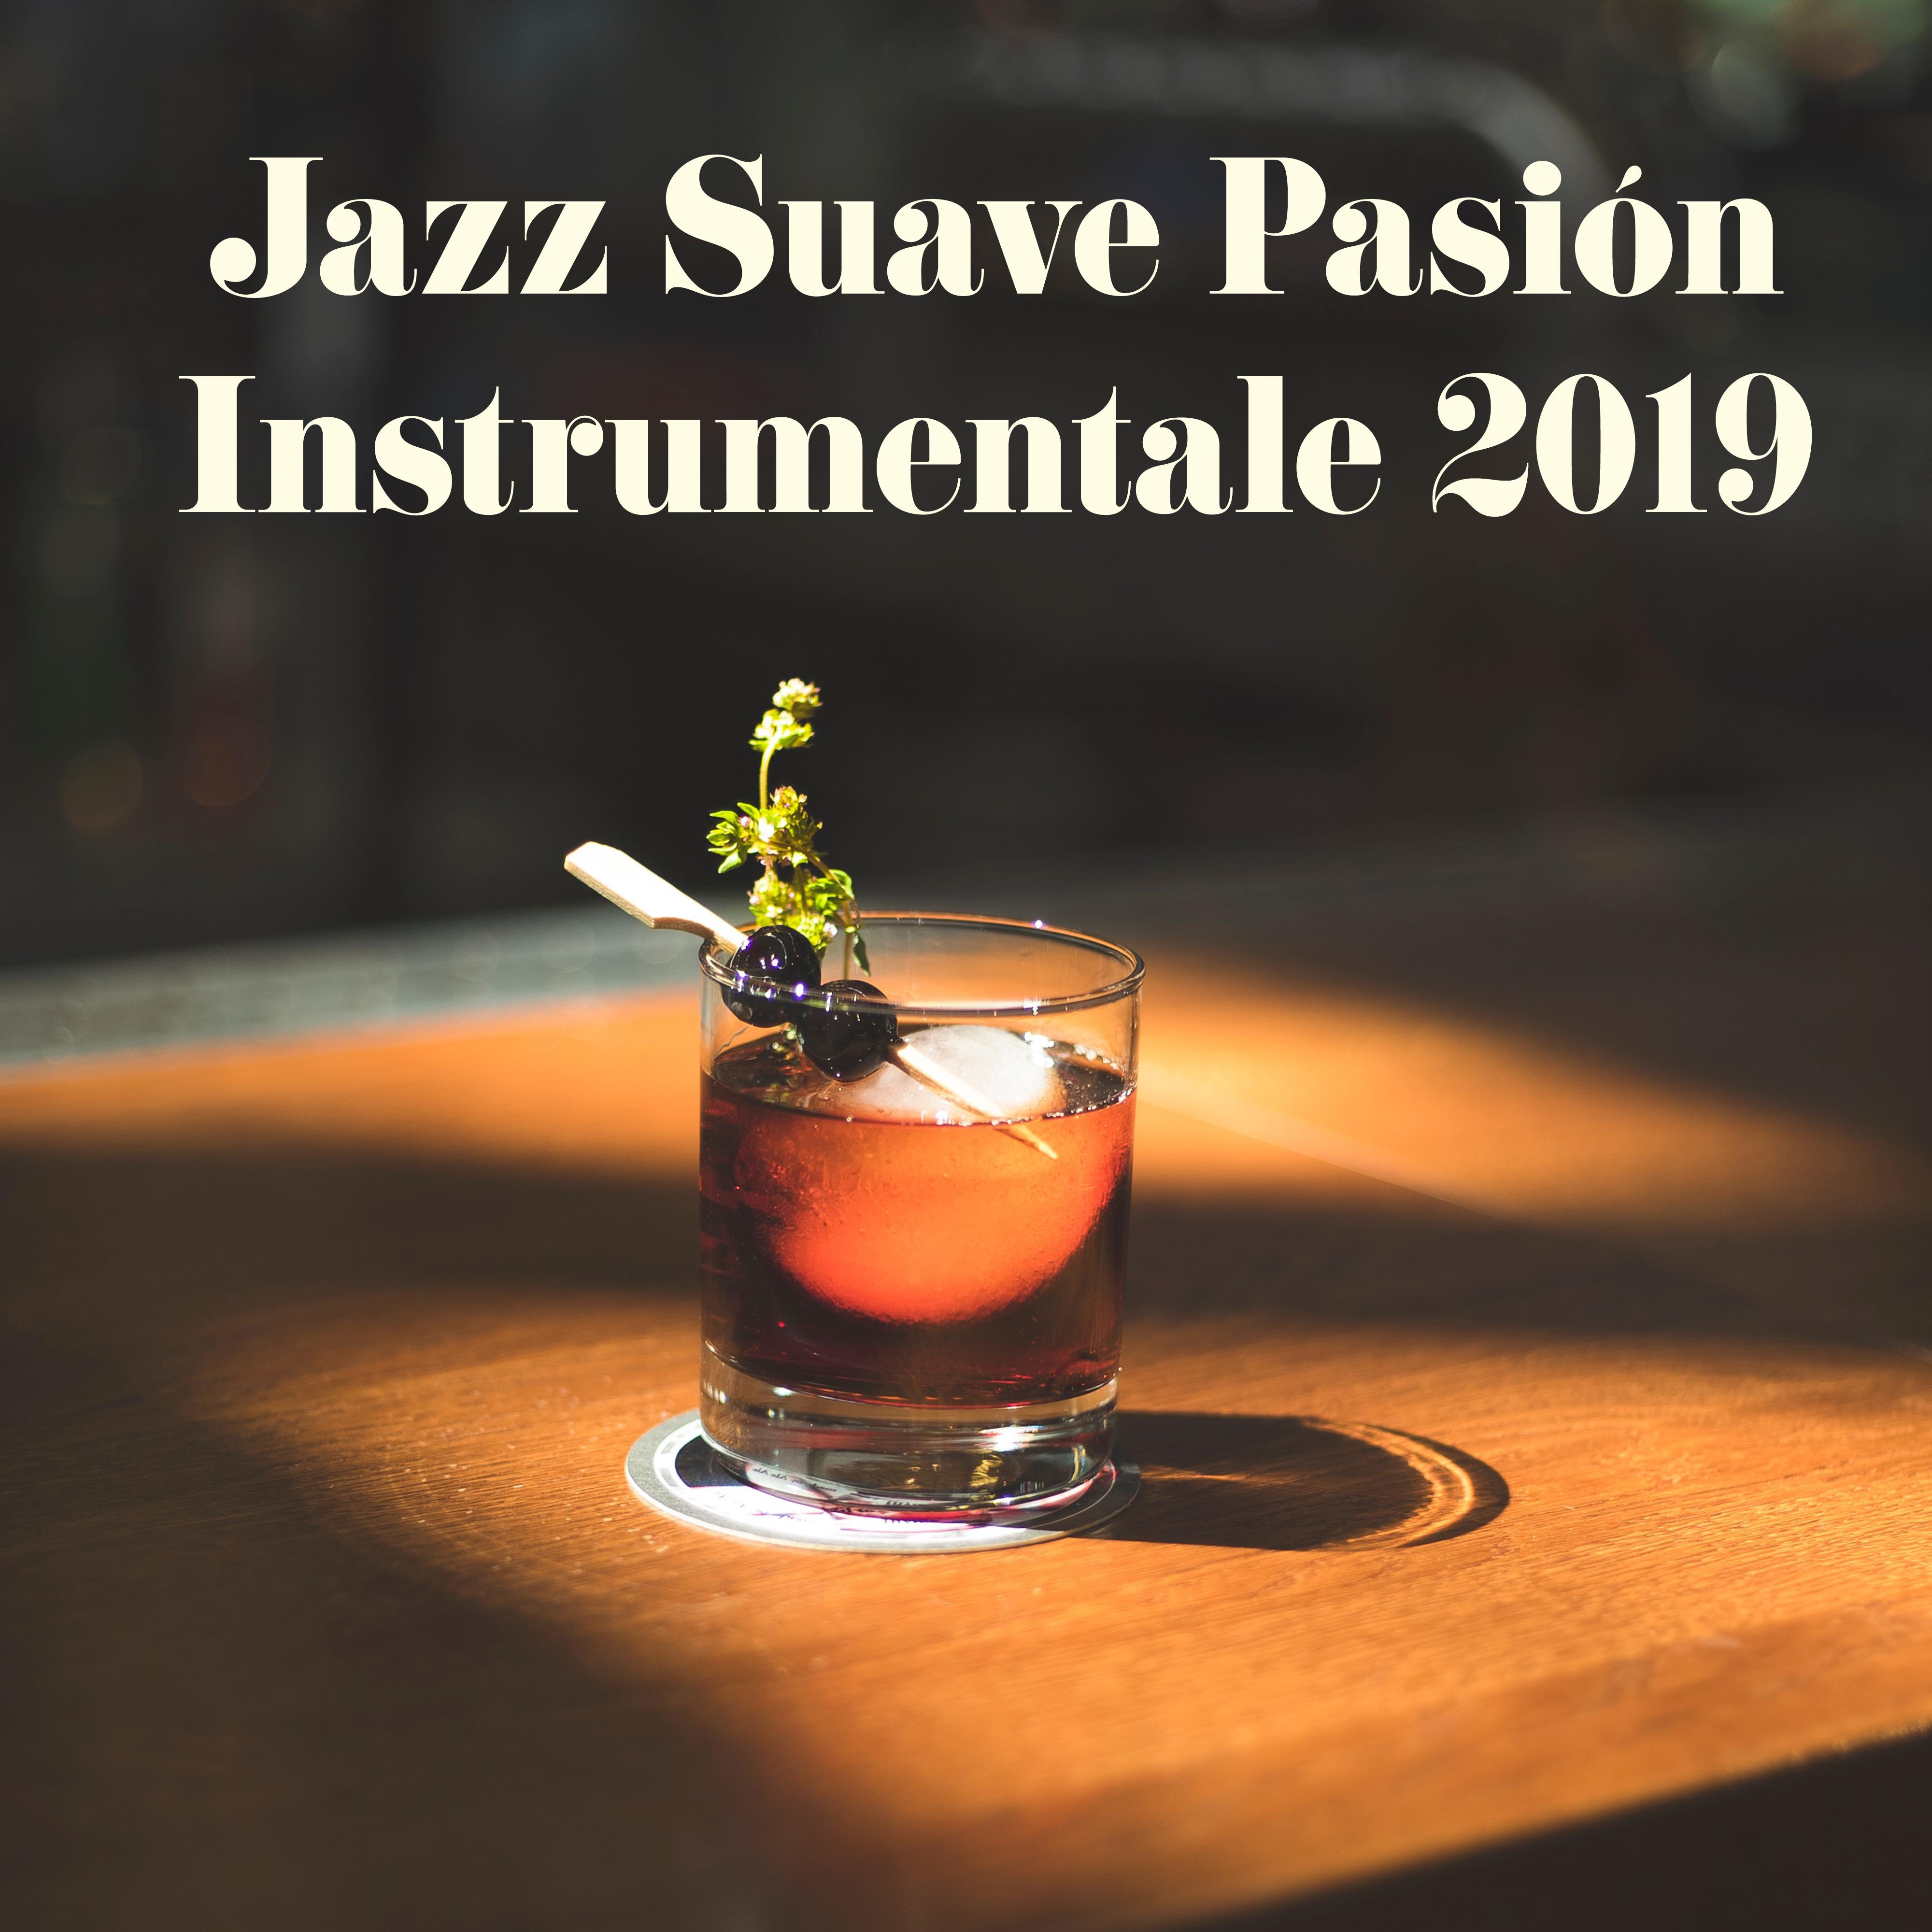 Romantic Bath with Glass of Wine: 15 Smooth Instrumental Jazz Songs for Two, Tasty Dinner, Erotic Moments in Bedroom, New Music 2019